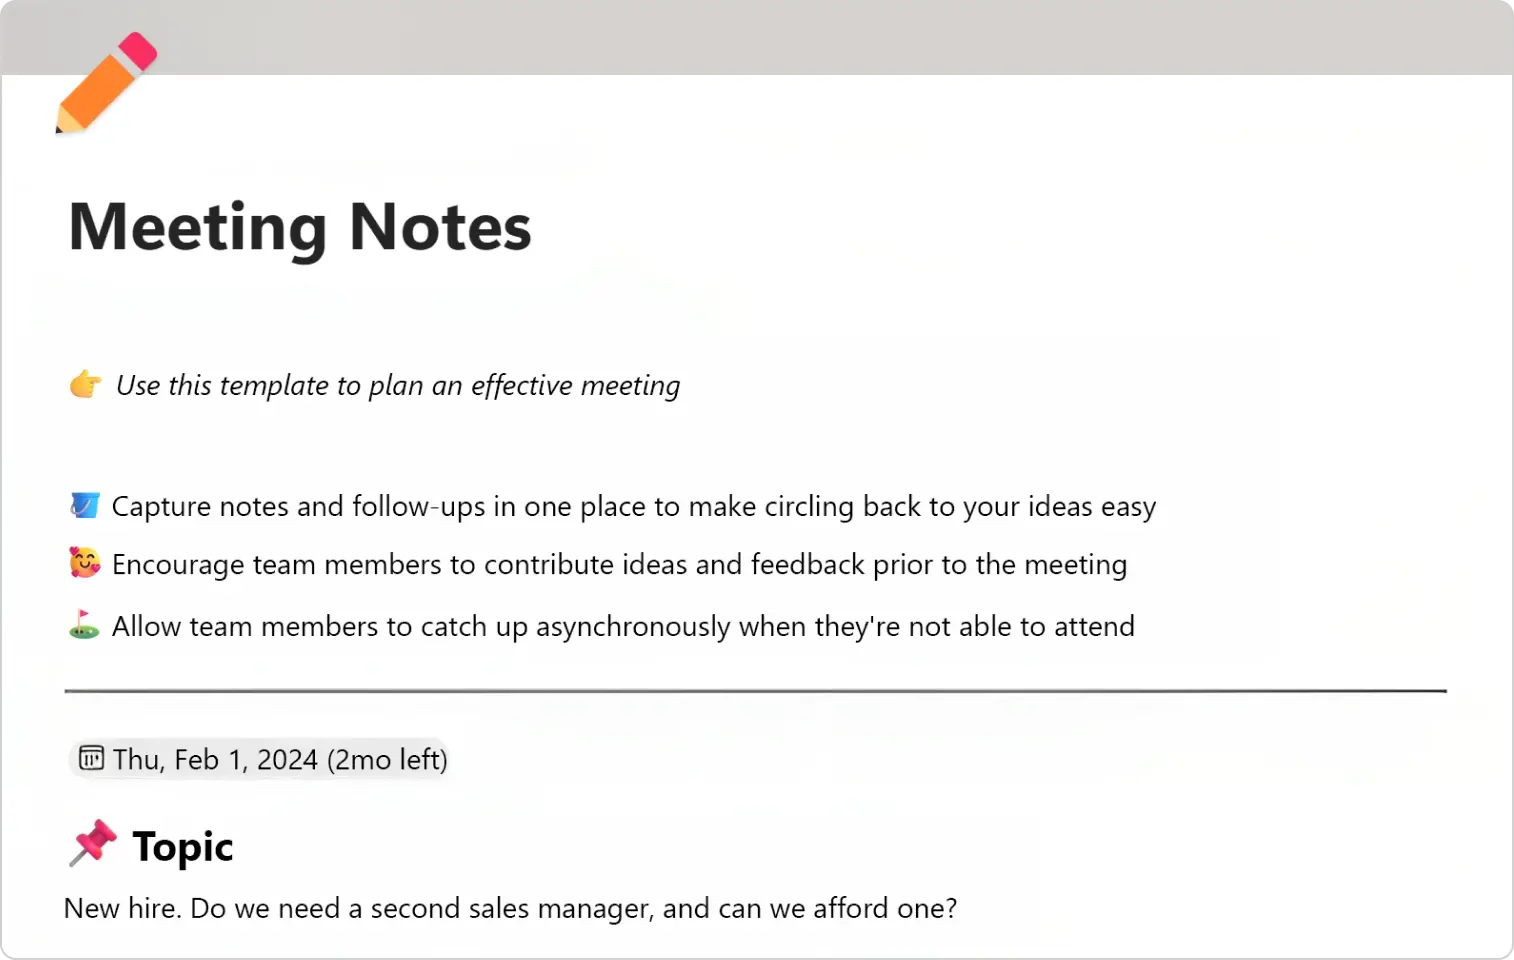 An image of a meeting notes template from Microsoft Loop.